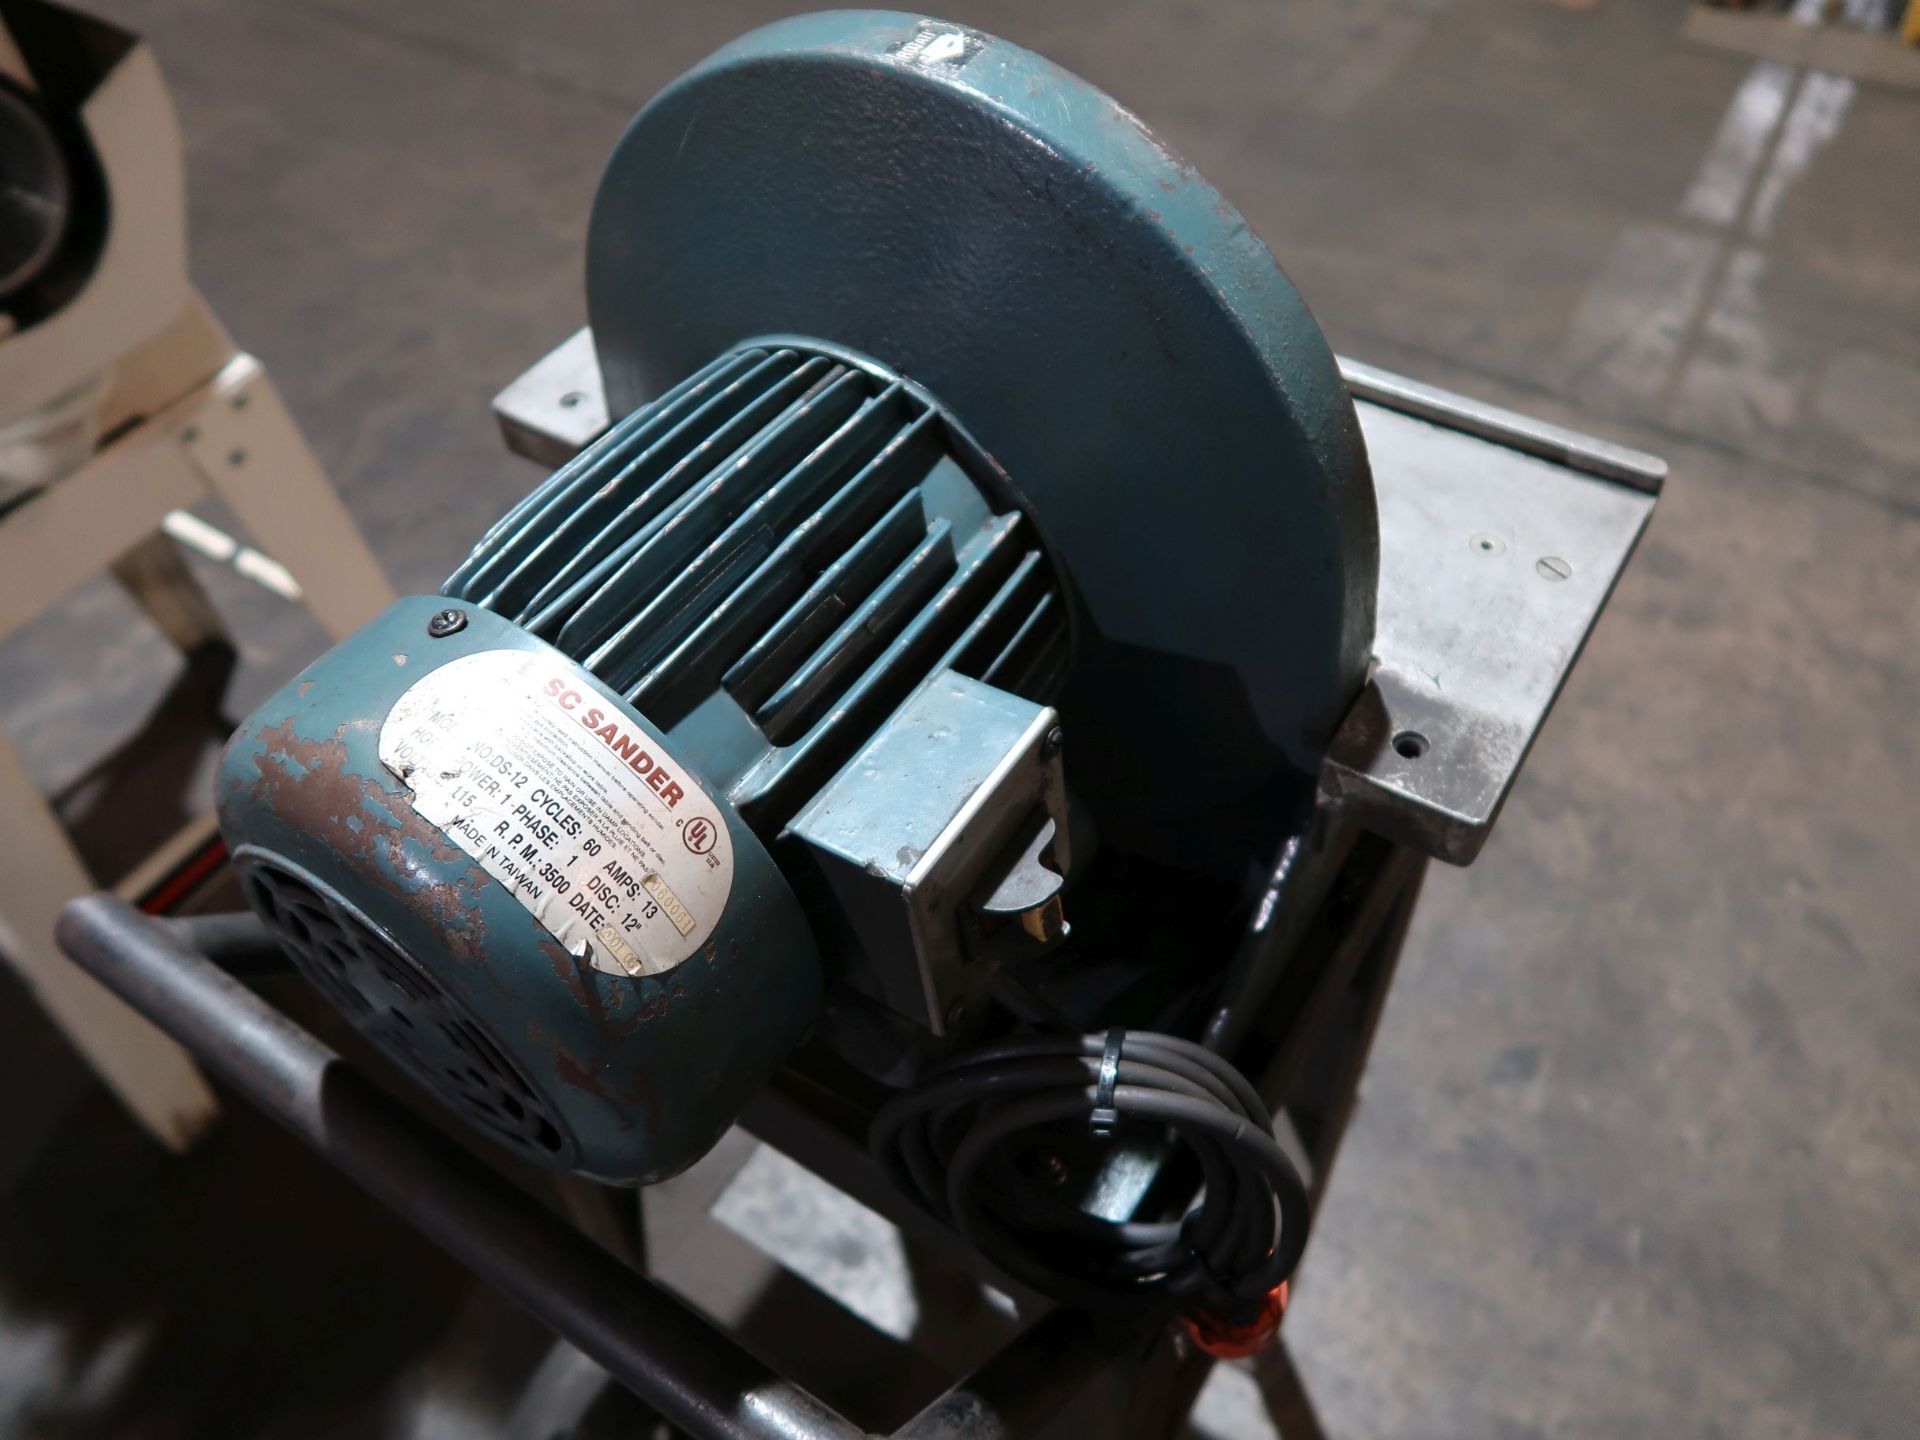 12" MFG. UNKNOWN DISC SANDER WITH STAND - Image 2 of 3